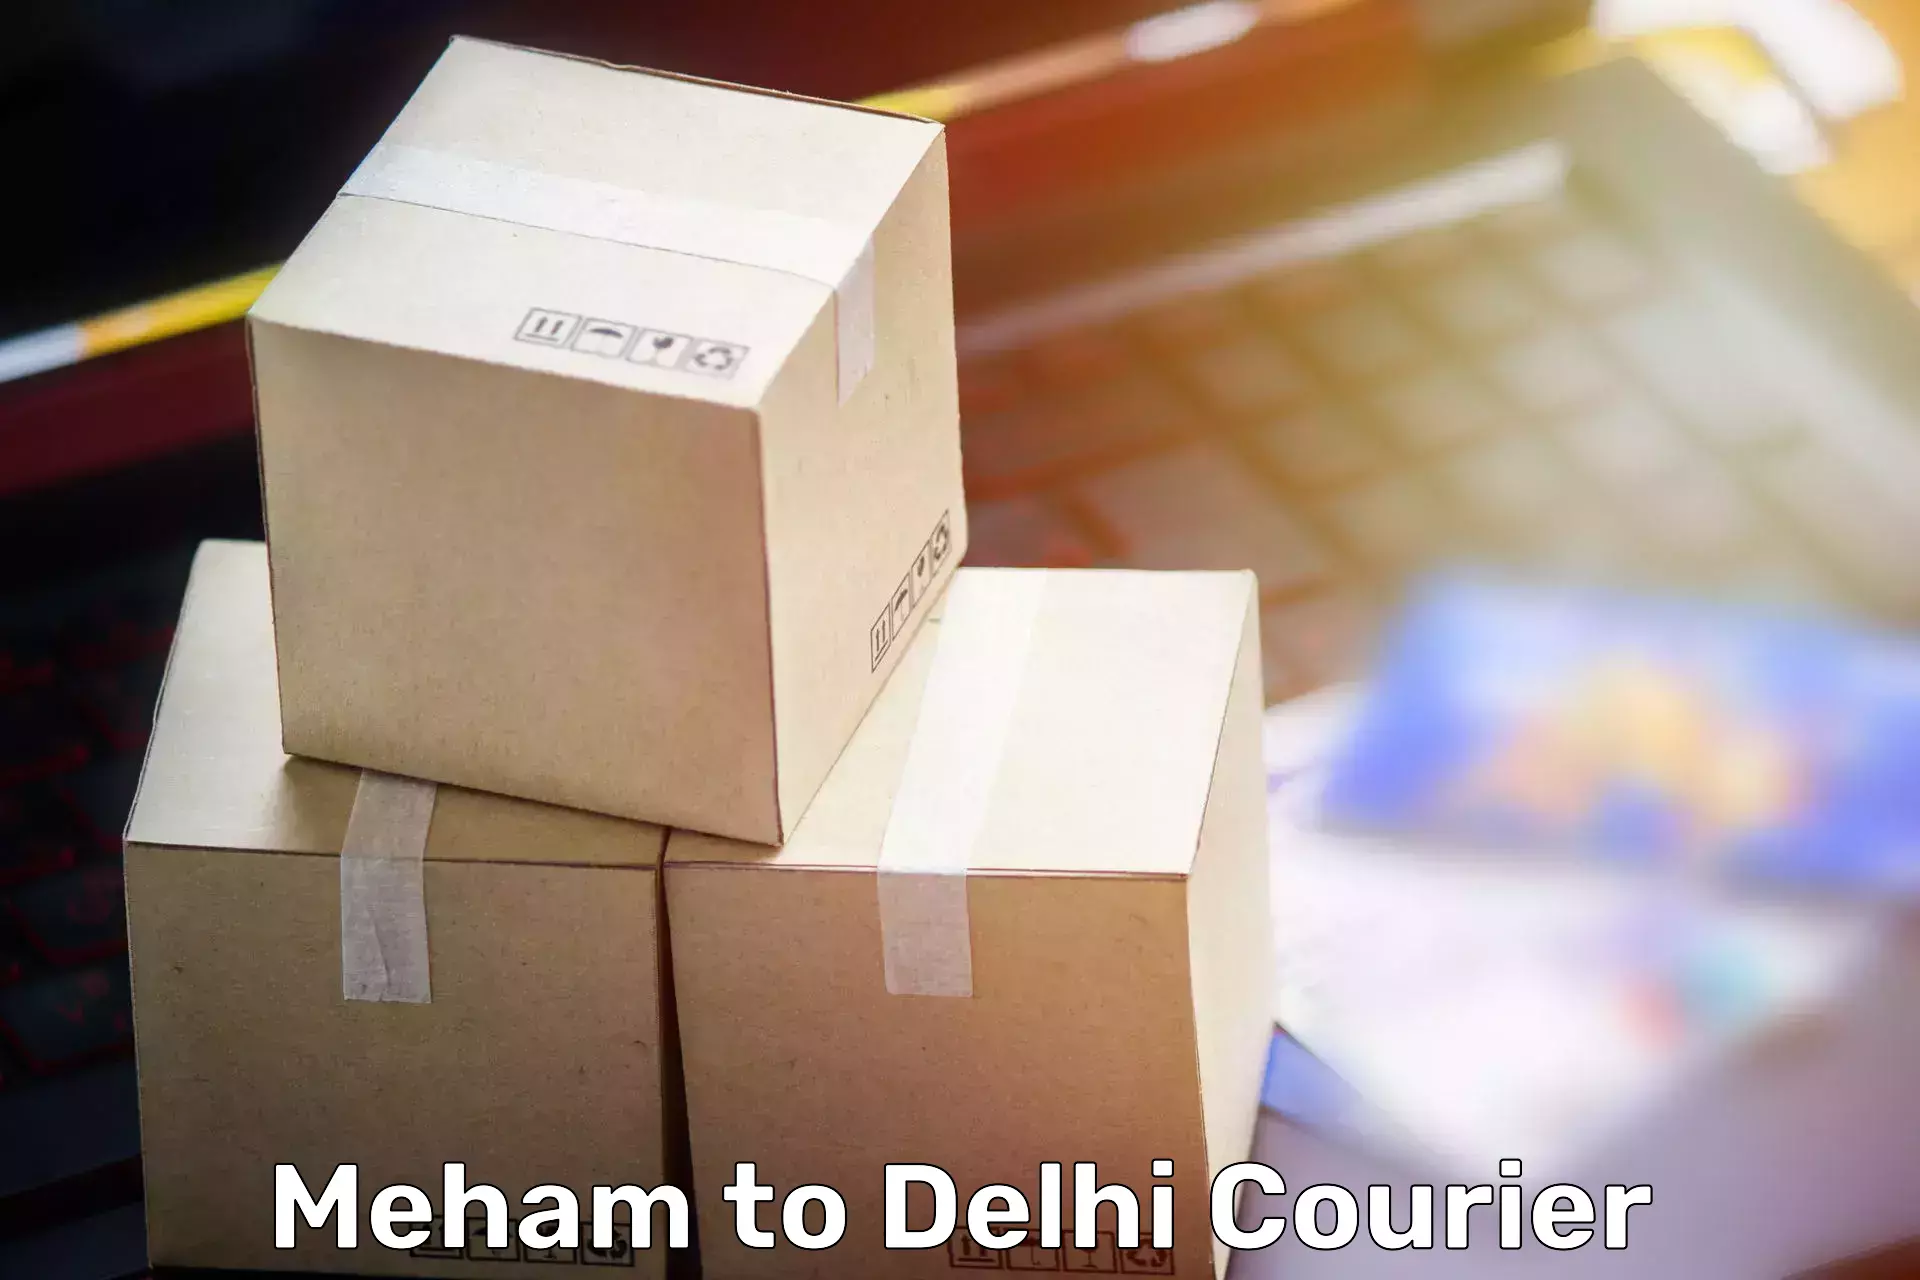 Furniture delivery service Meham to Jhilmil